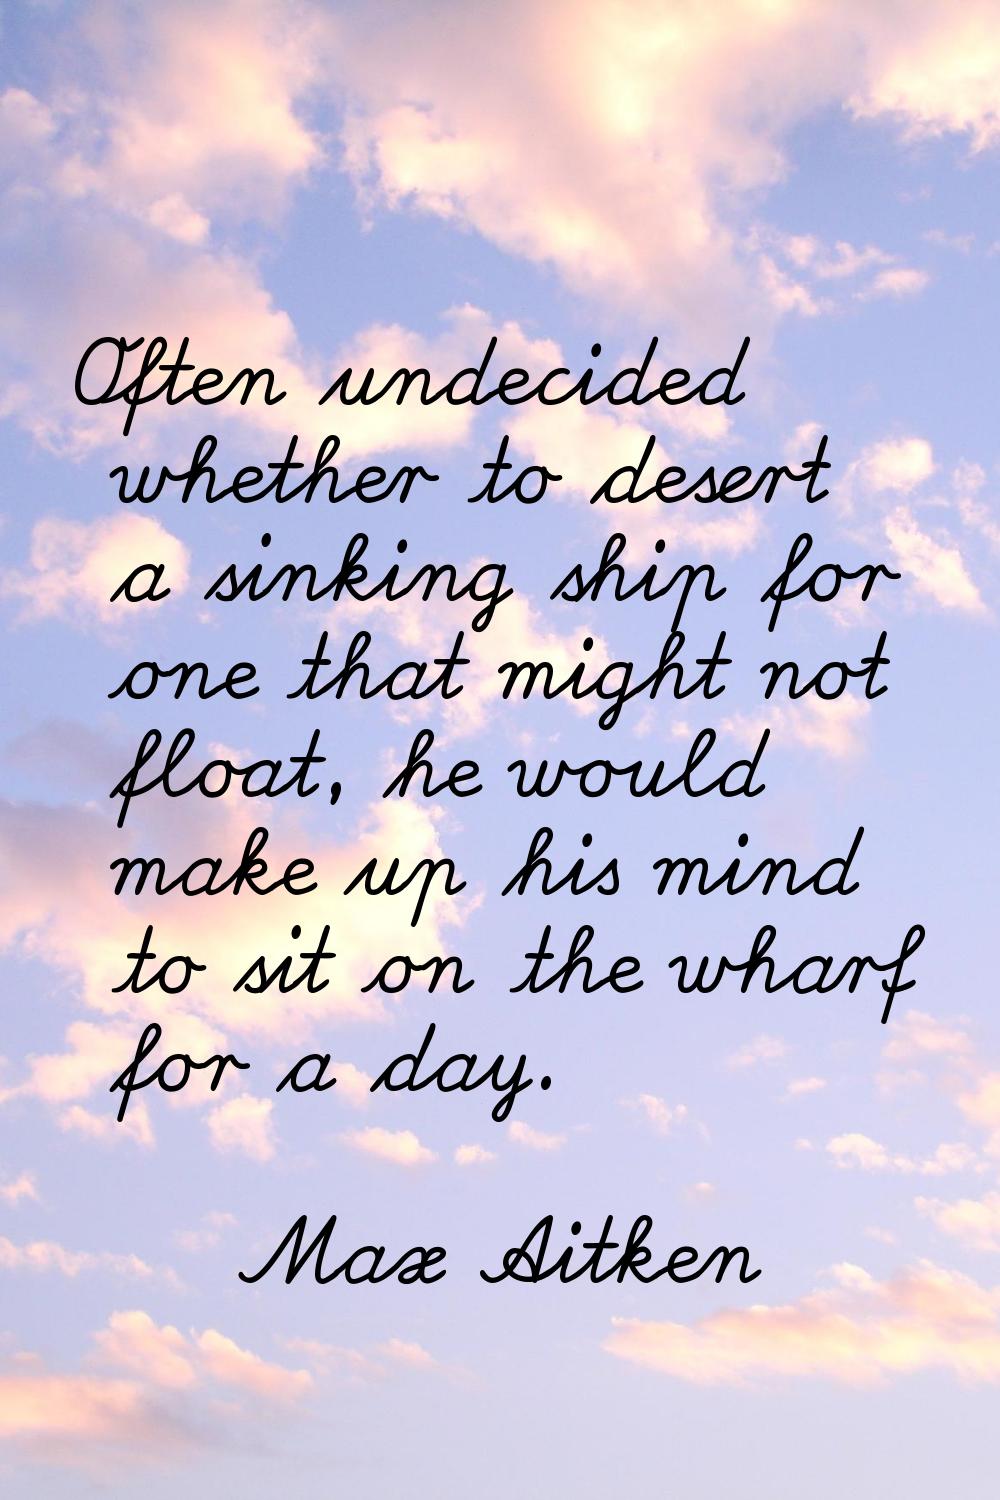 Often undecided whether to desert a sinking ship for one that might not float, he would make up his